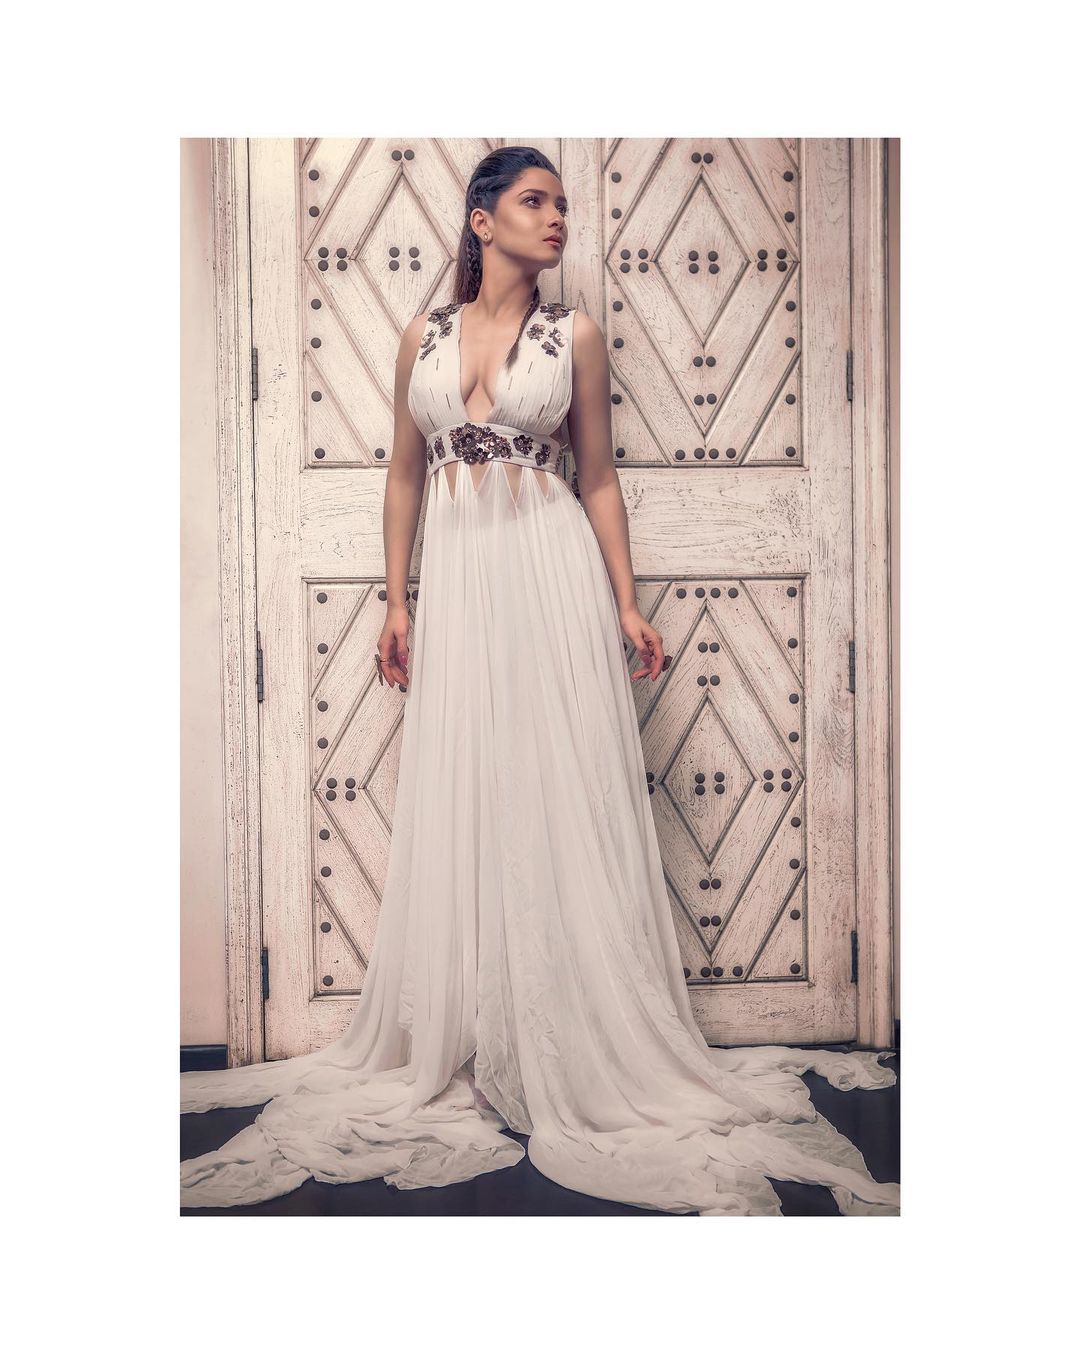 Ankita Lokhande in gown